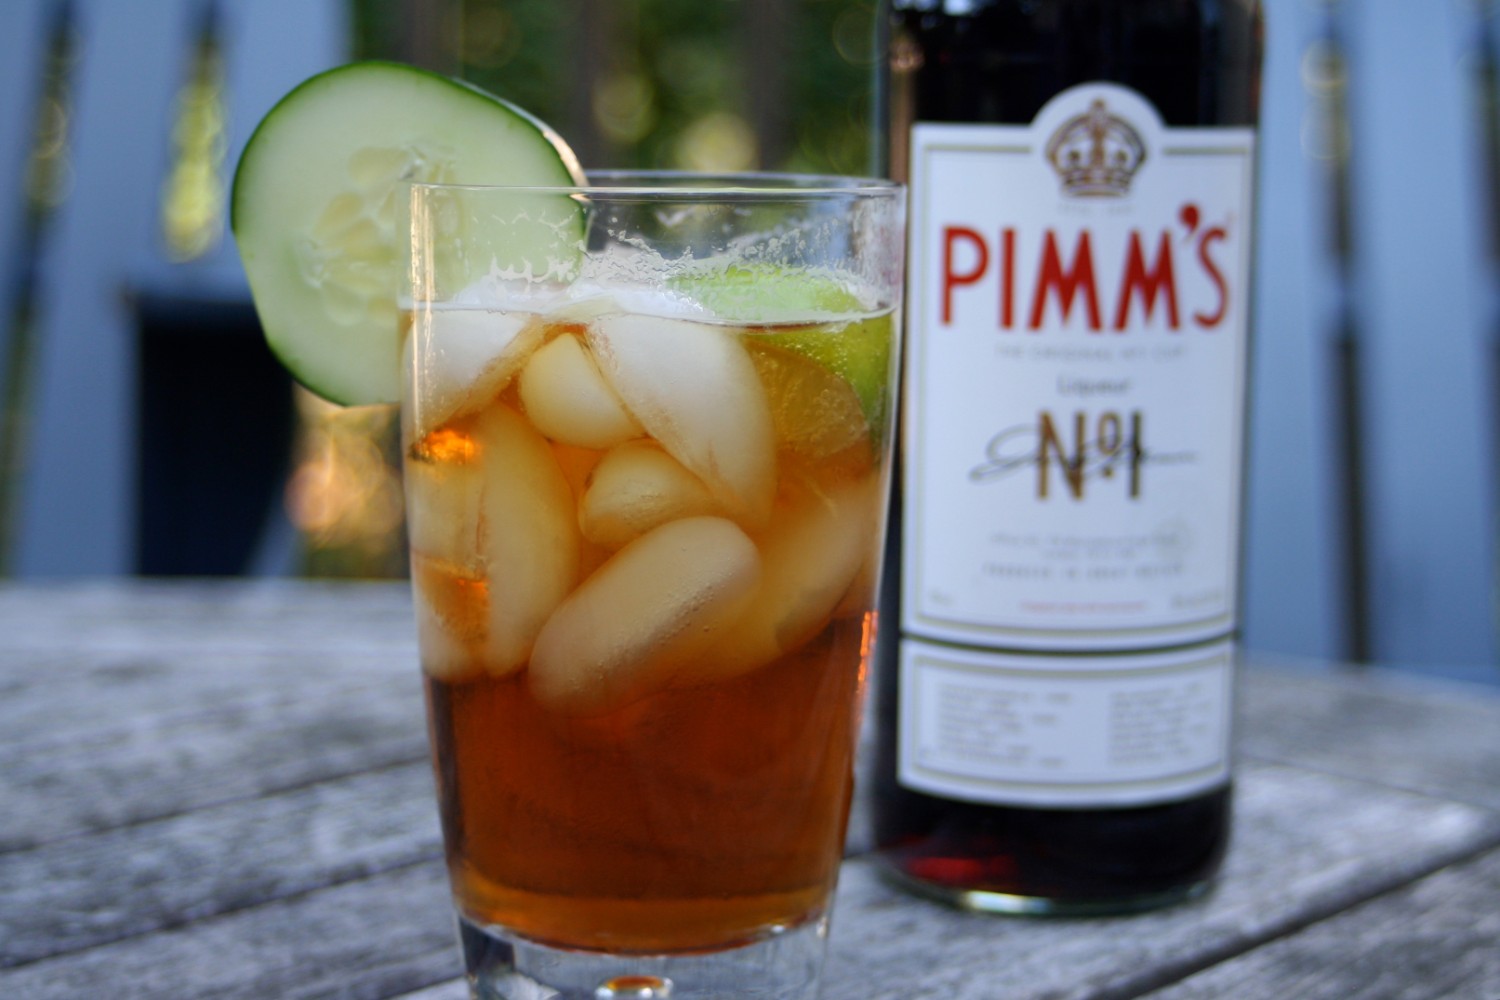 Pimms bottle and full glass - Credit to Whitney